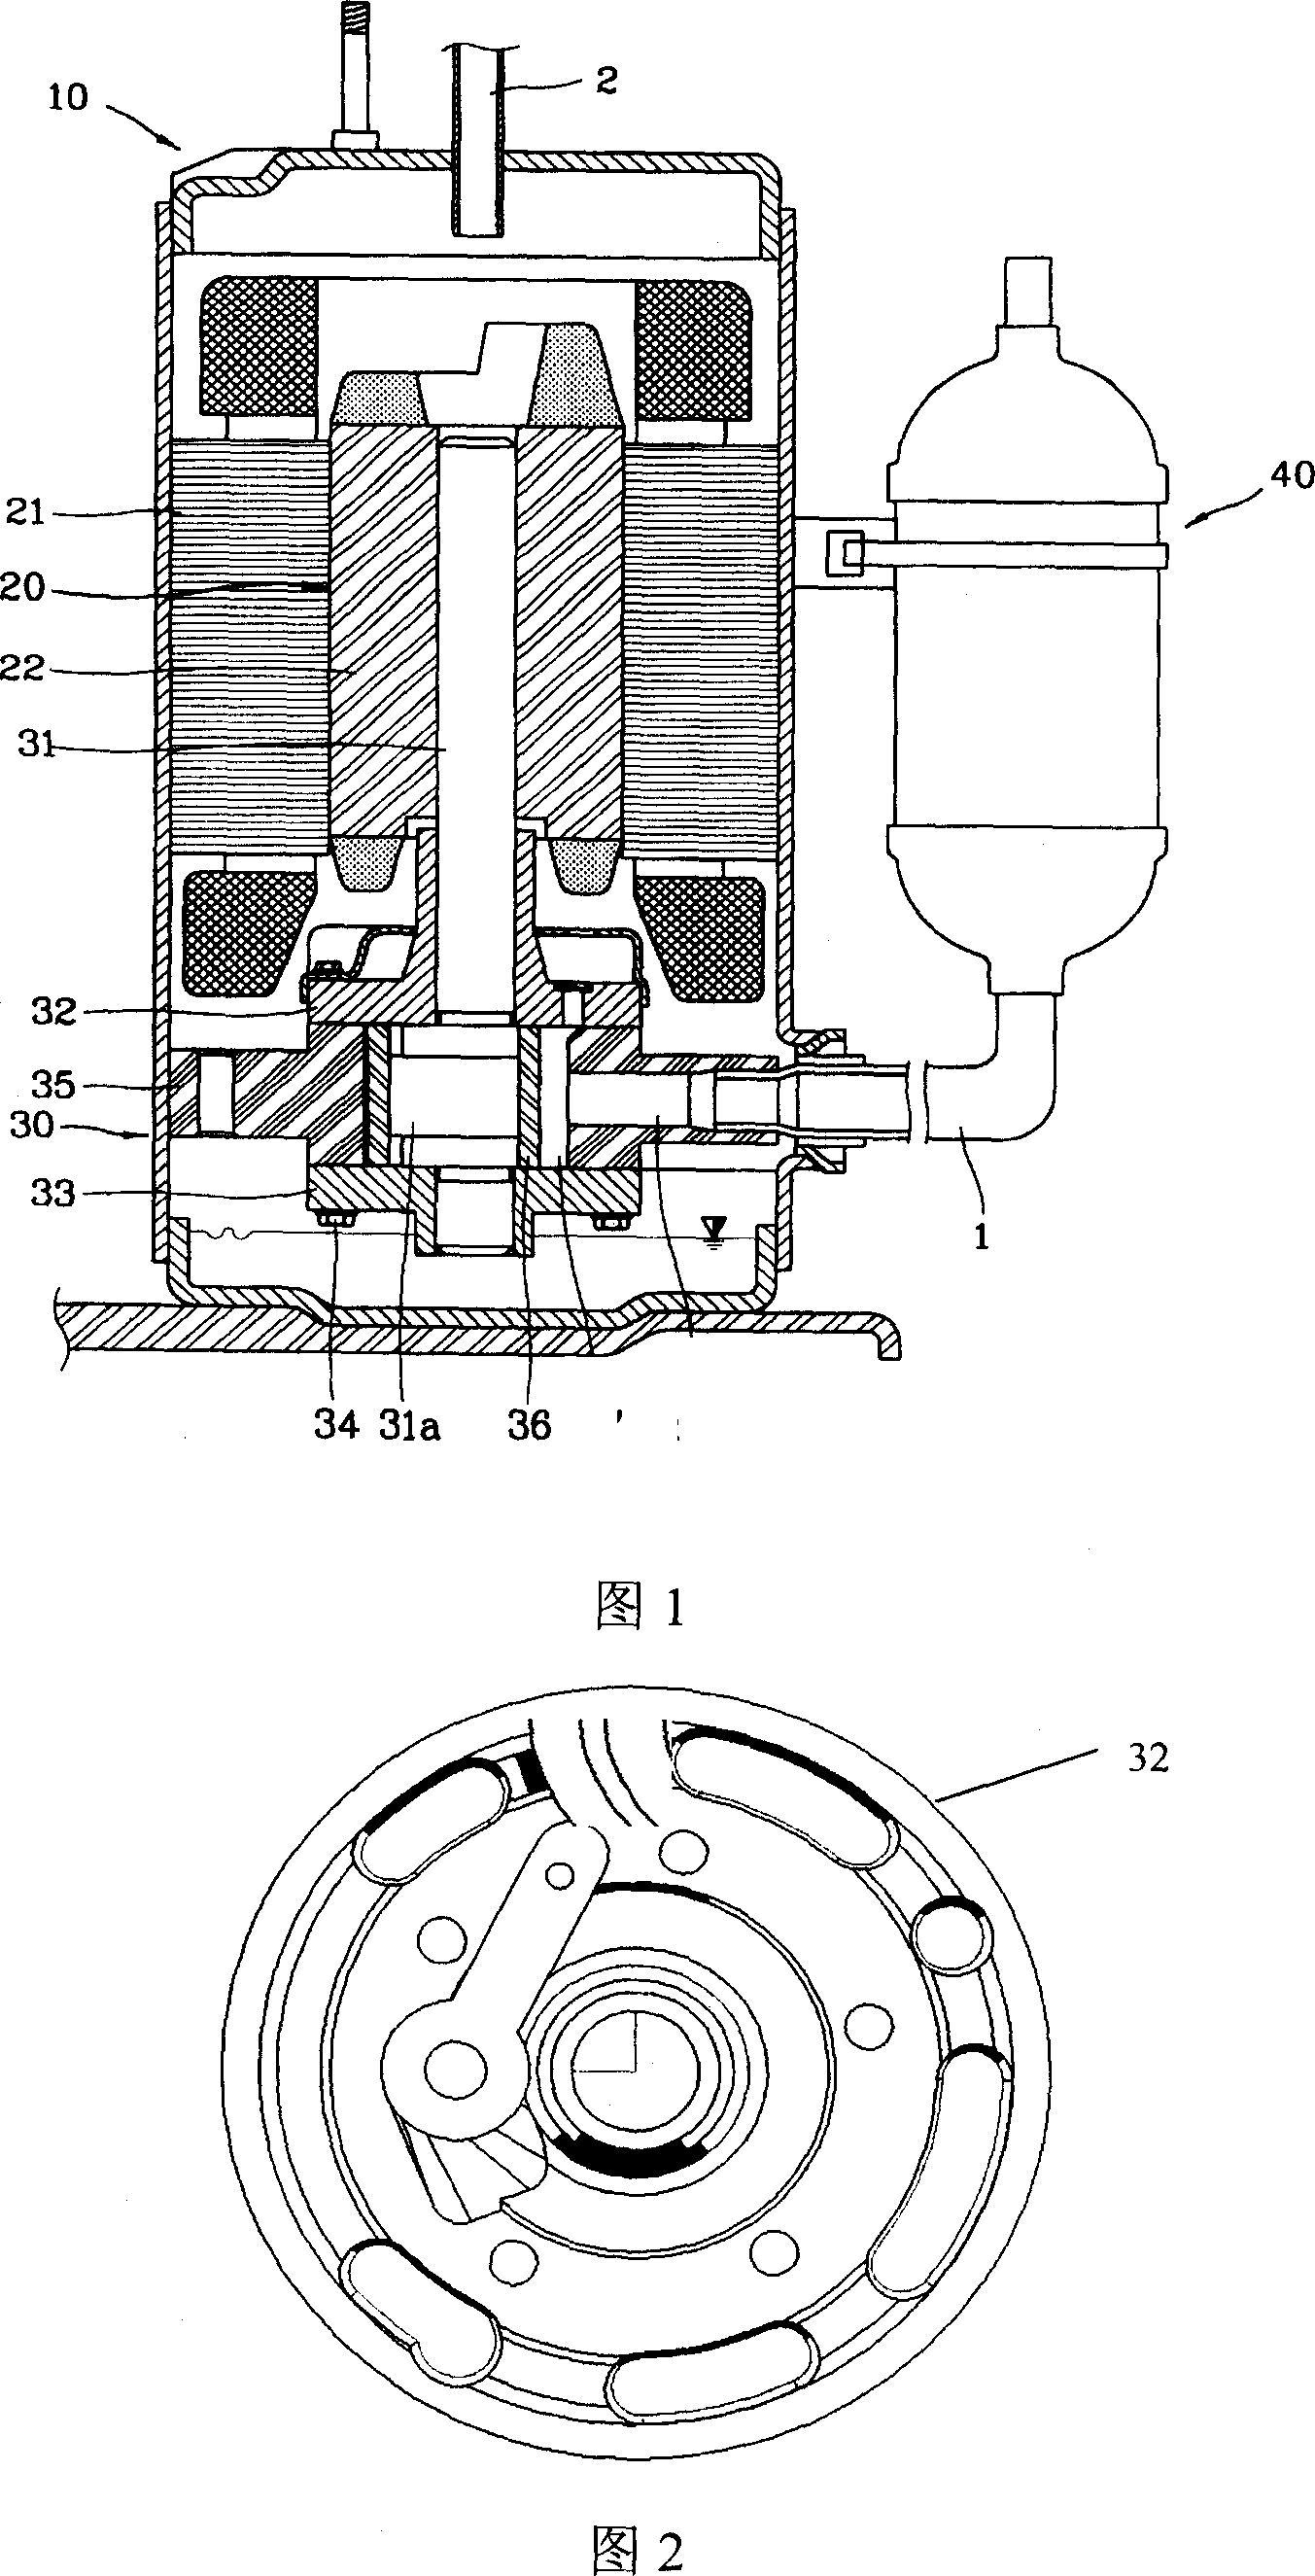 Sealed rolling rotor type compressor bearing structure